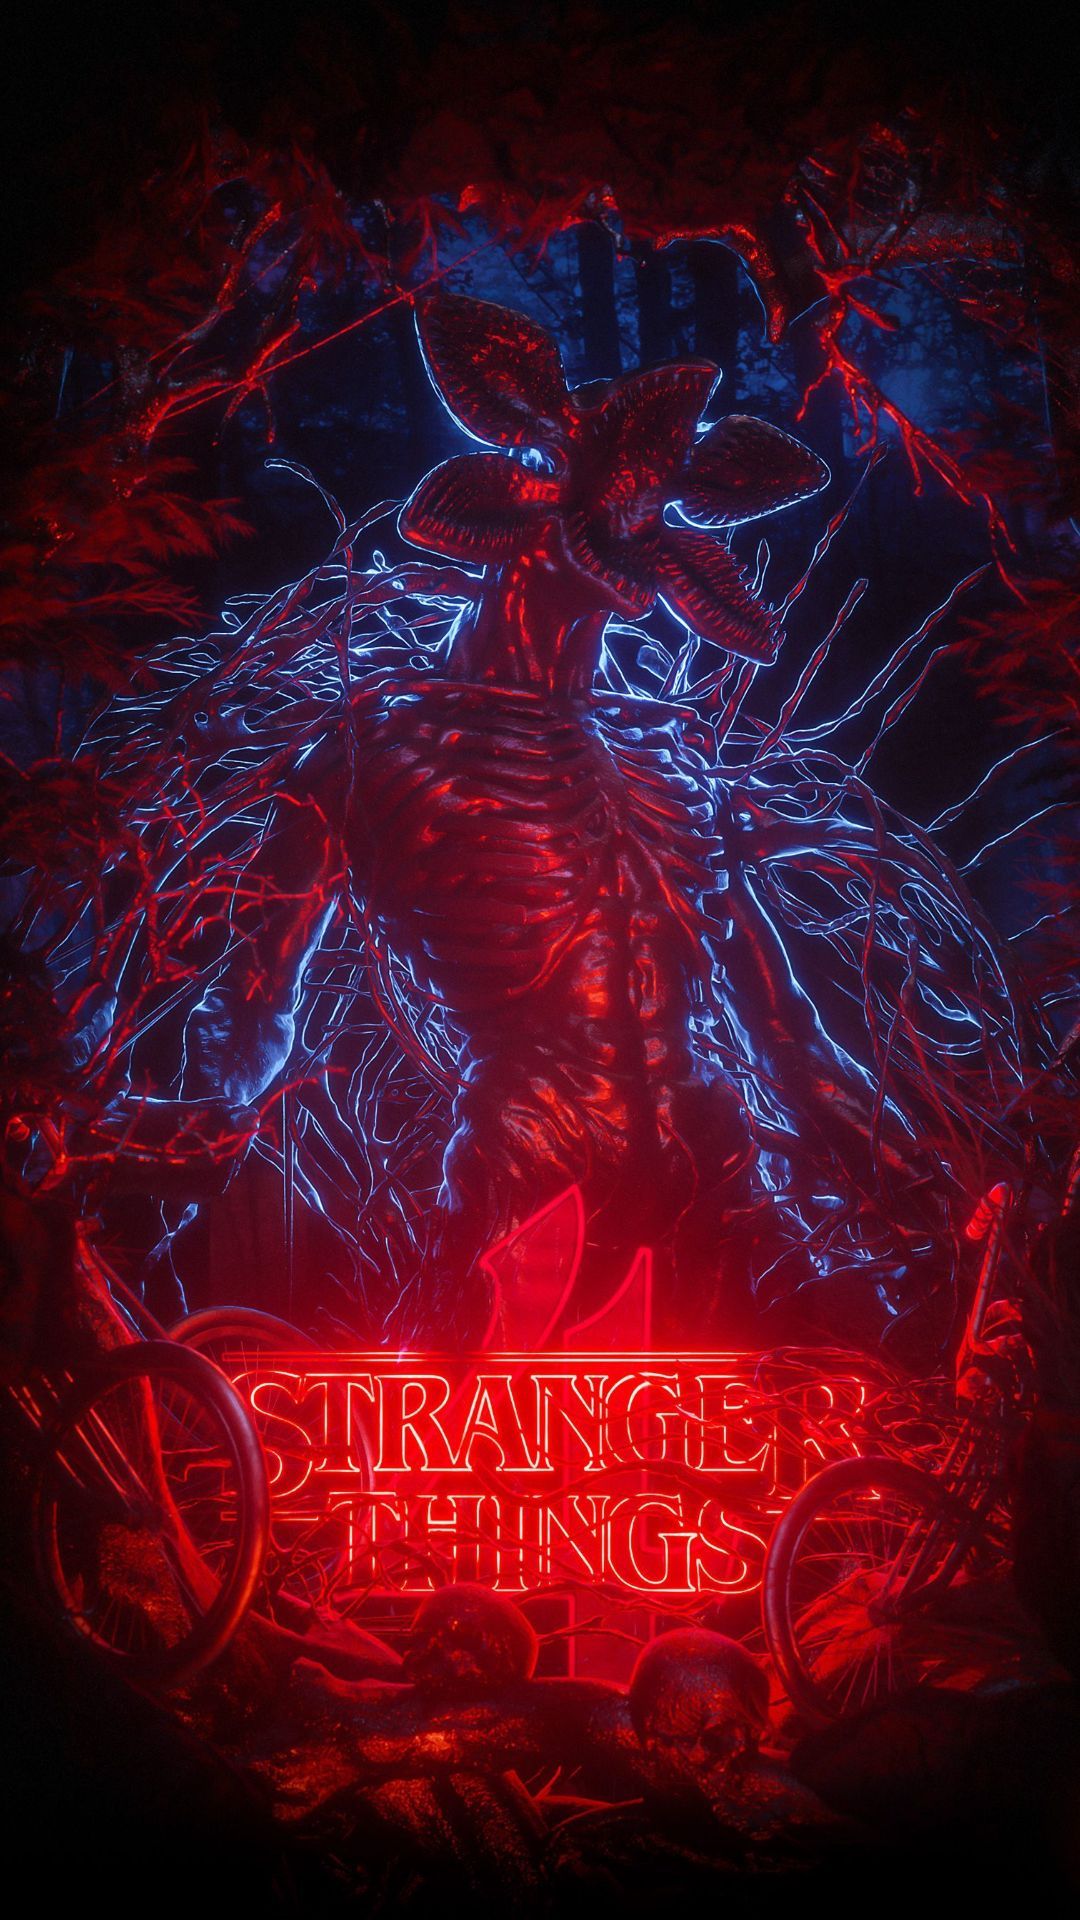 Stranger Things 11 iPhone Wallpaper with high-resolution 1080x1920 pixel. You can use this wallpaper for your iPhone 5, 6, 7, 8, X, XS, XR backgrounds, Mobile Screensaver, or iPad Lock Screen - Stranger Things